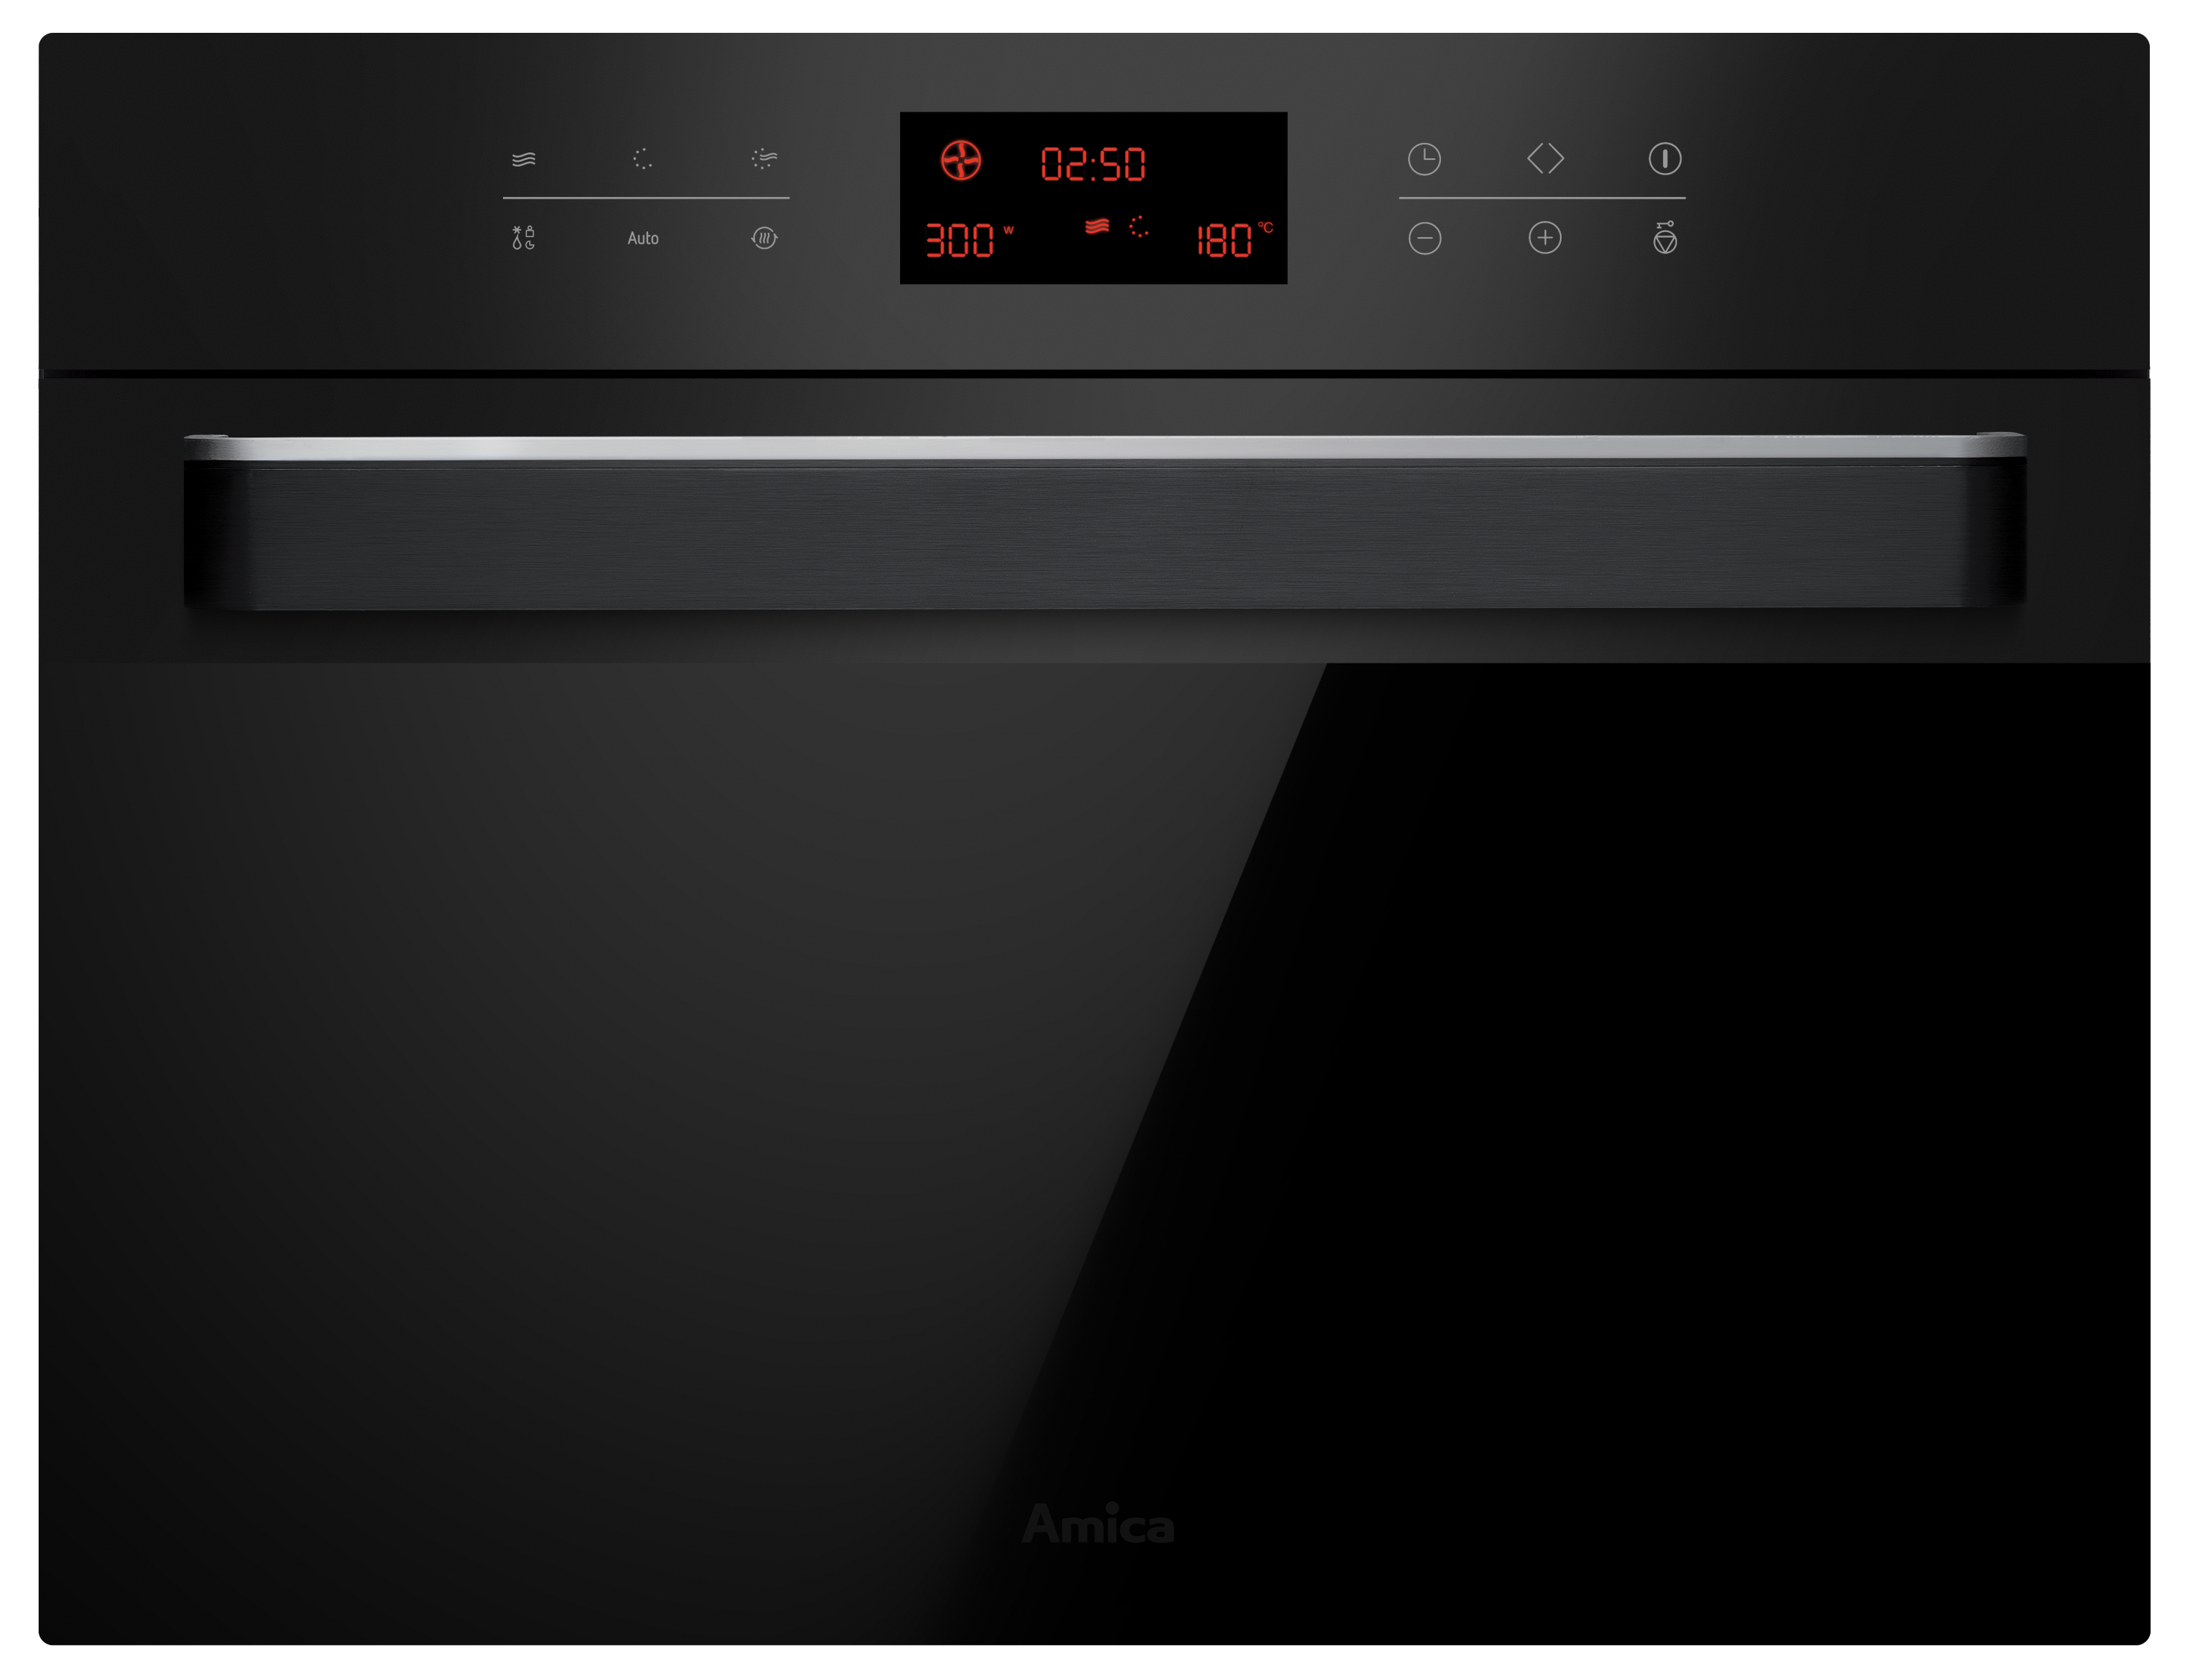 Built-in microwave oven